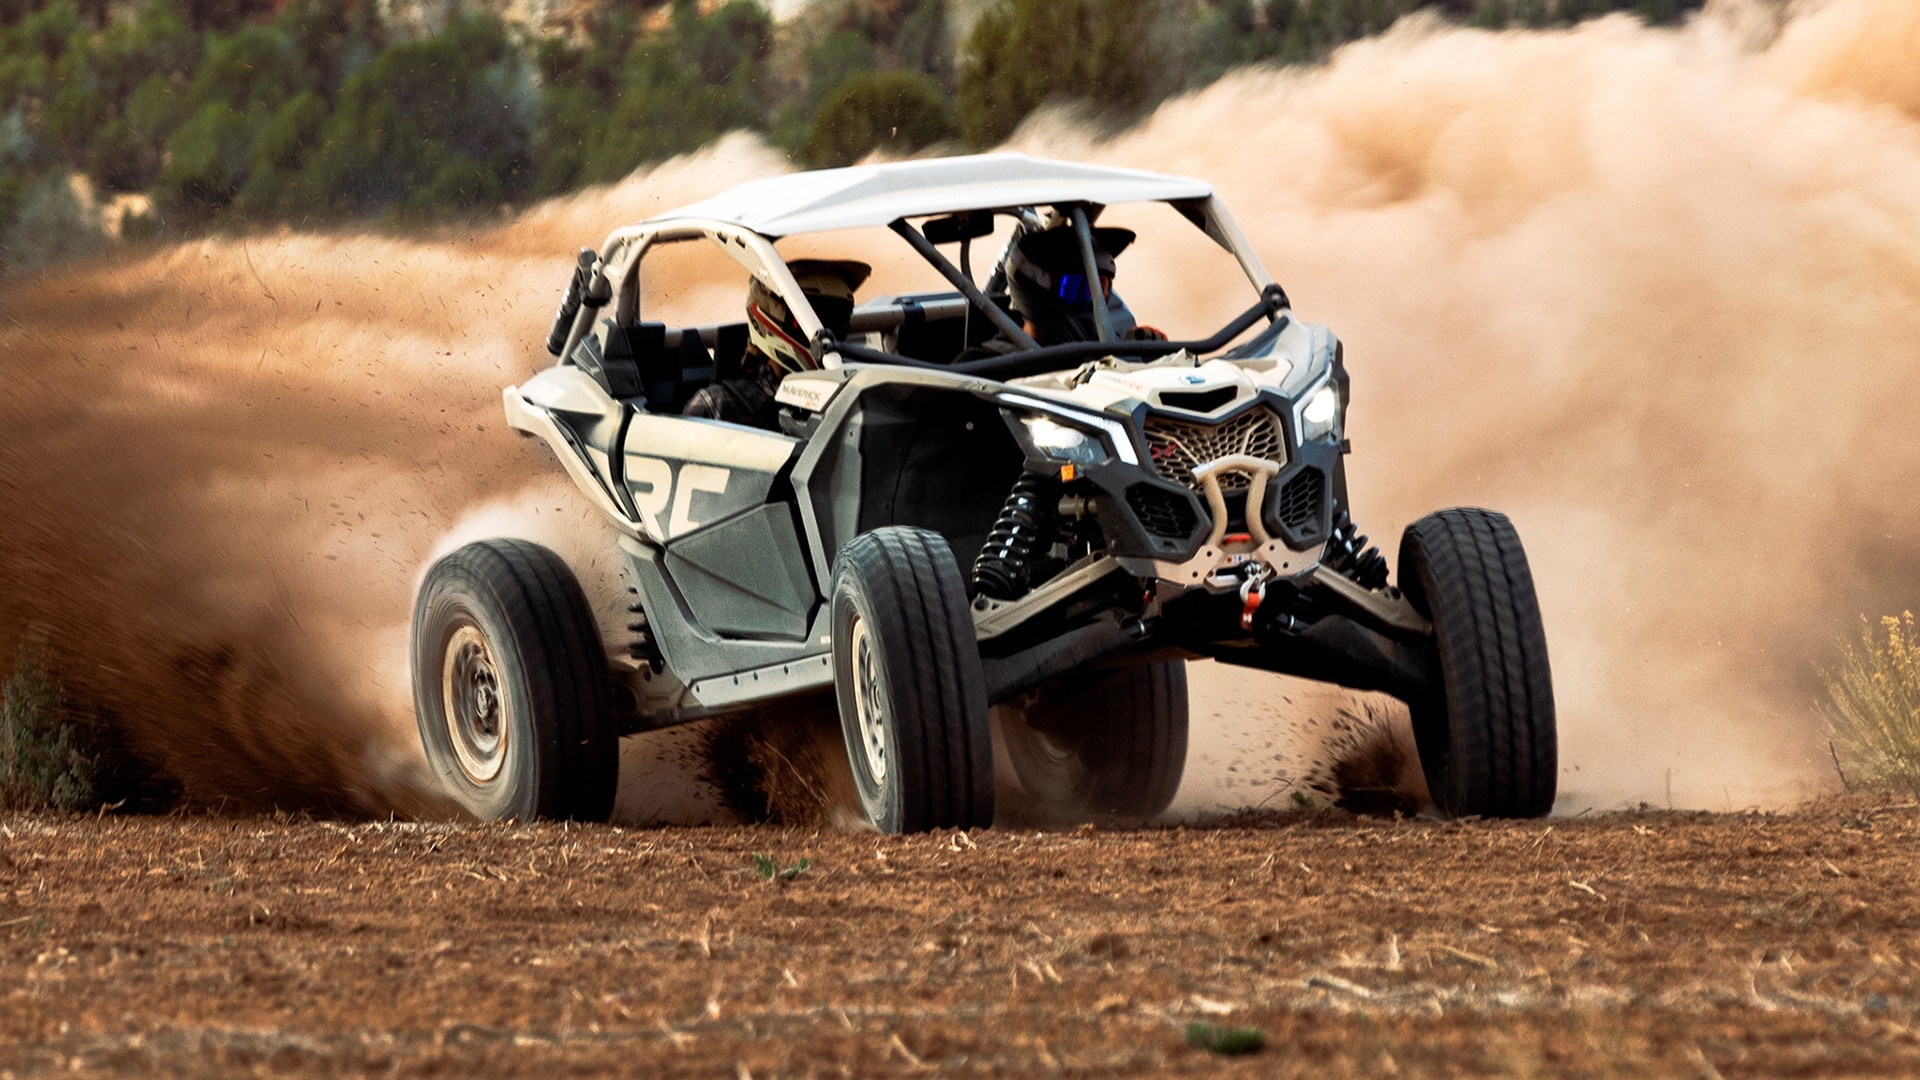 A Can-Am Maverick X3 RR riding out in a field